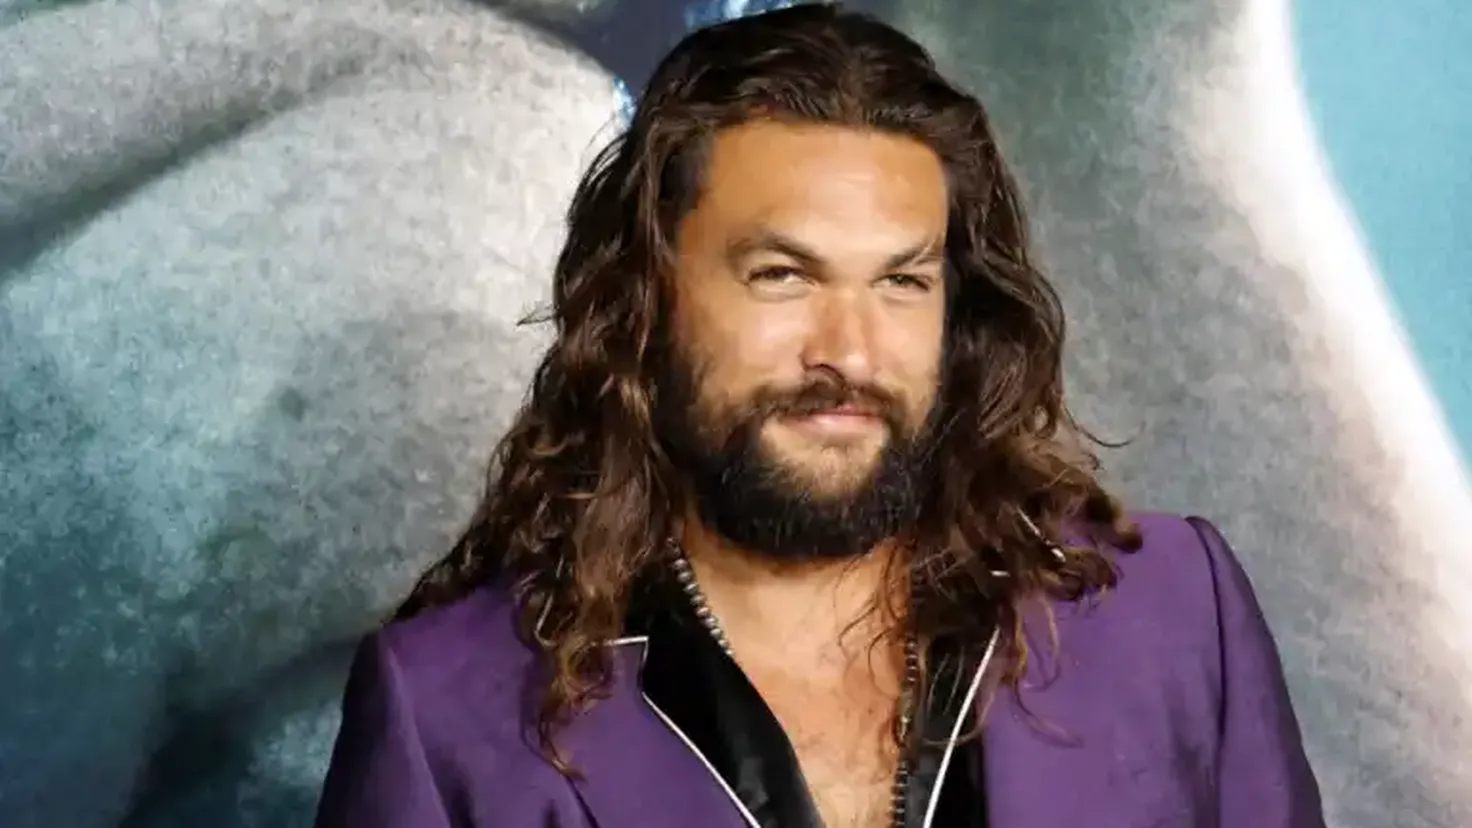 The diet that Jason Momoa had secretly: He carried chicken in his pockets on filming
